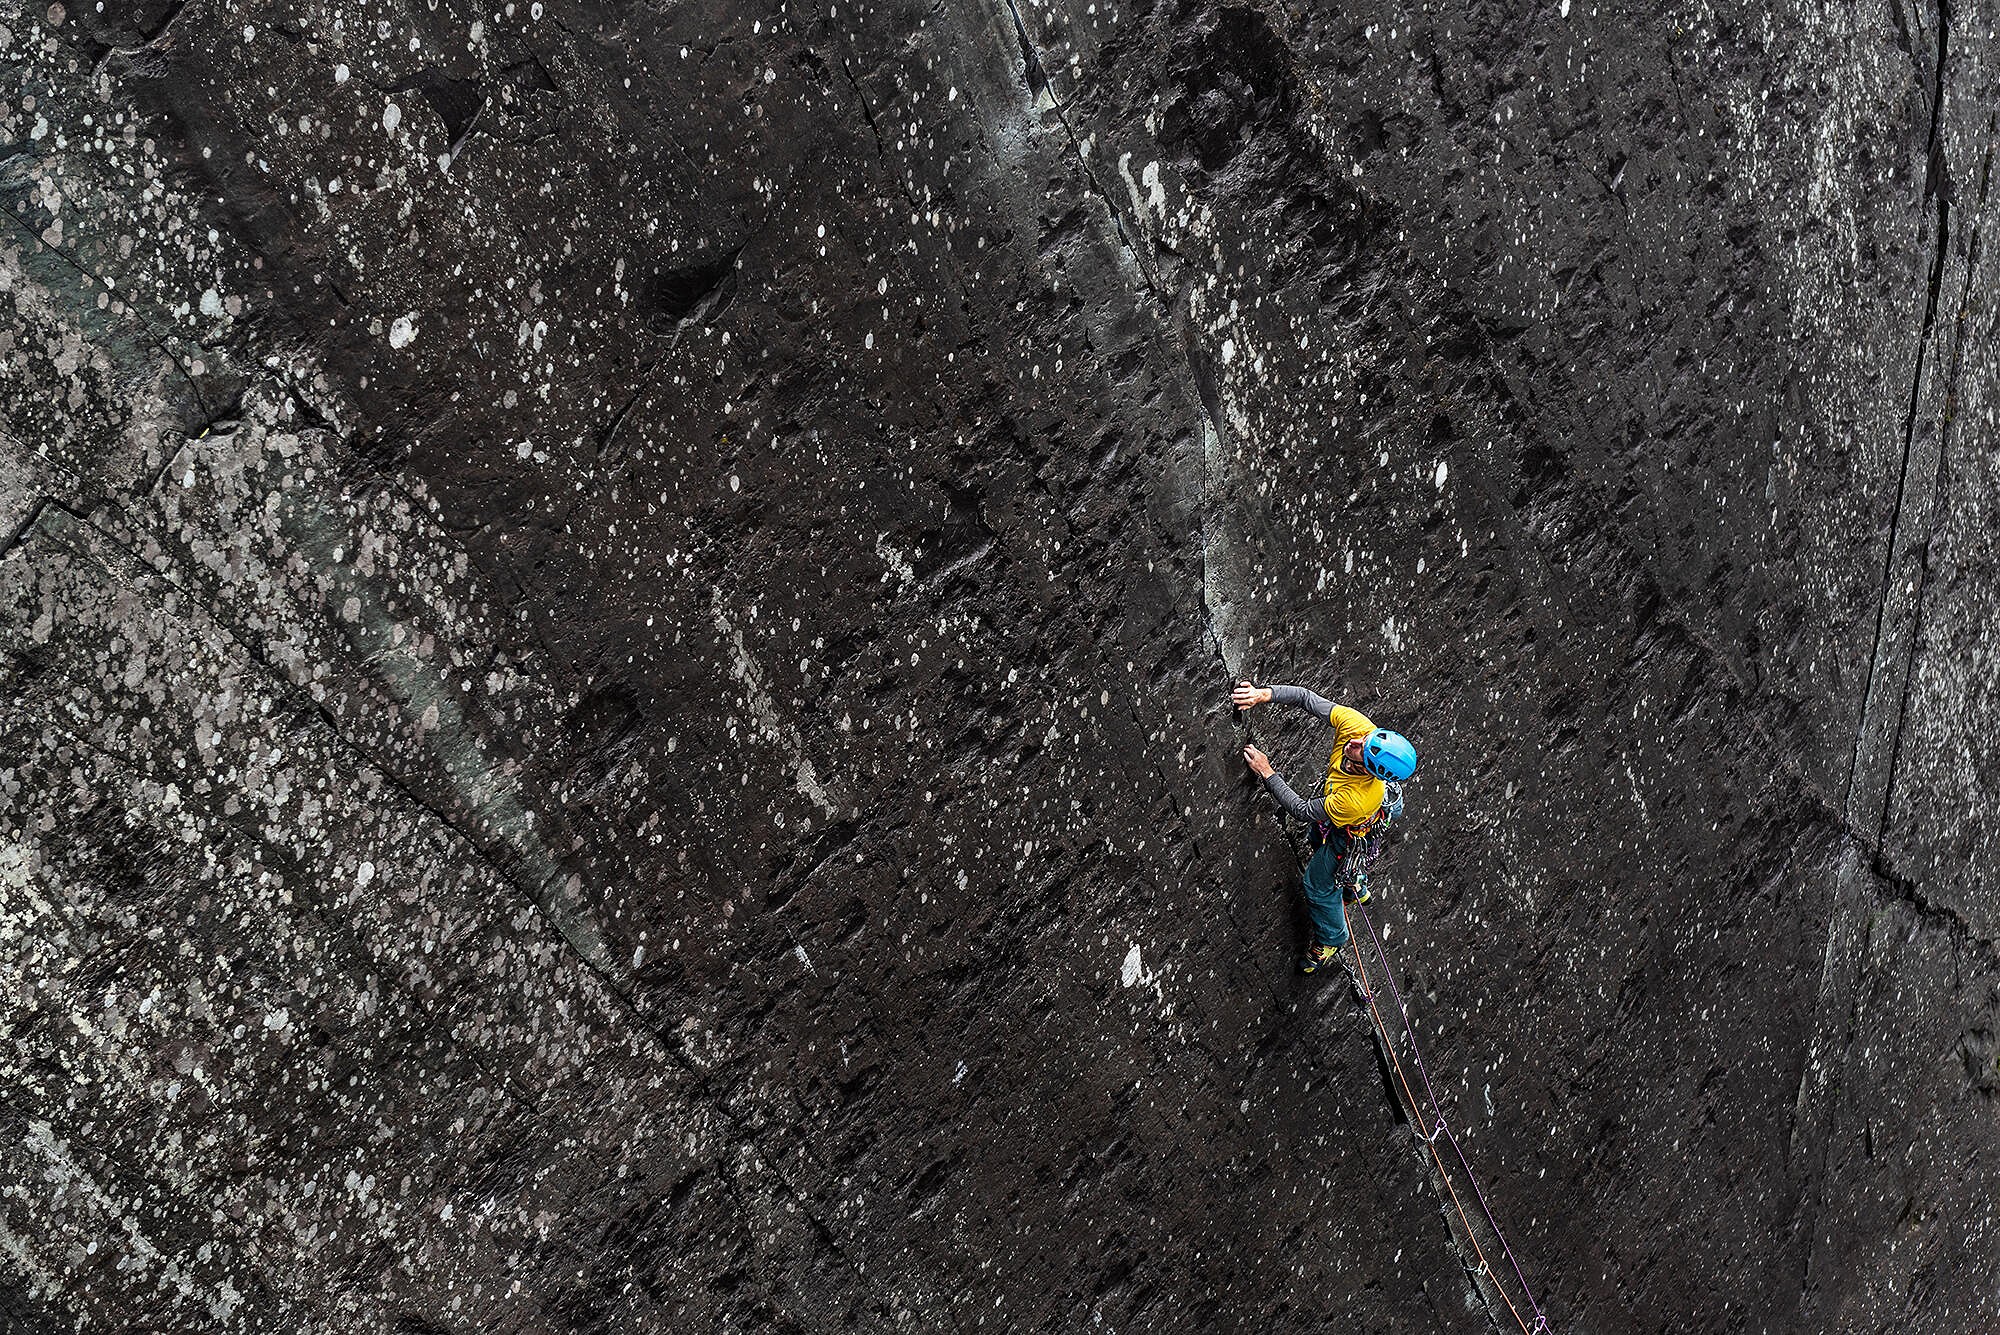 'Trad climbing is always my discipline of choice' - James McHaffie  © Marc Langley